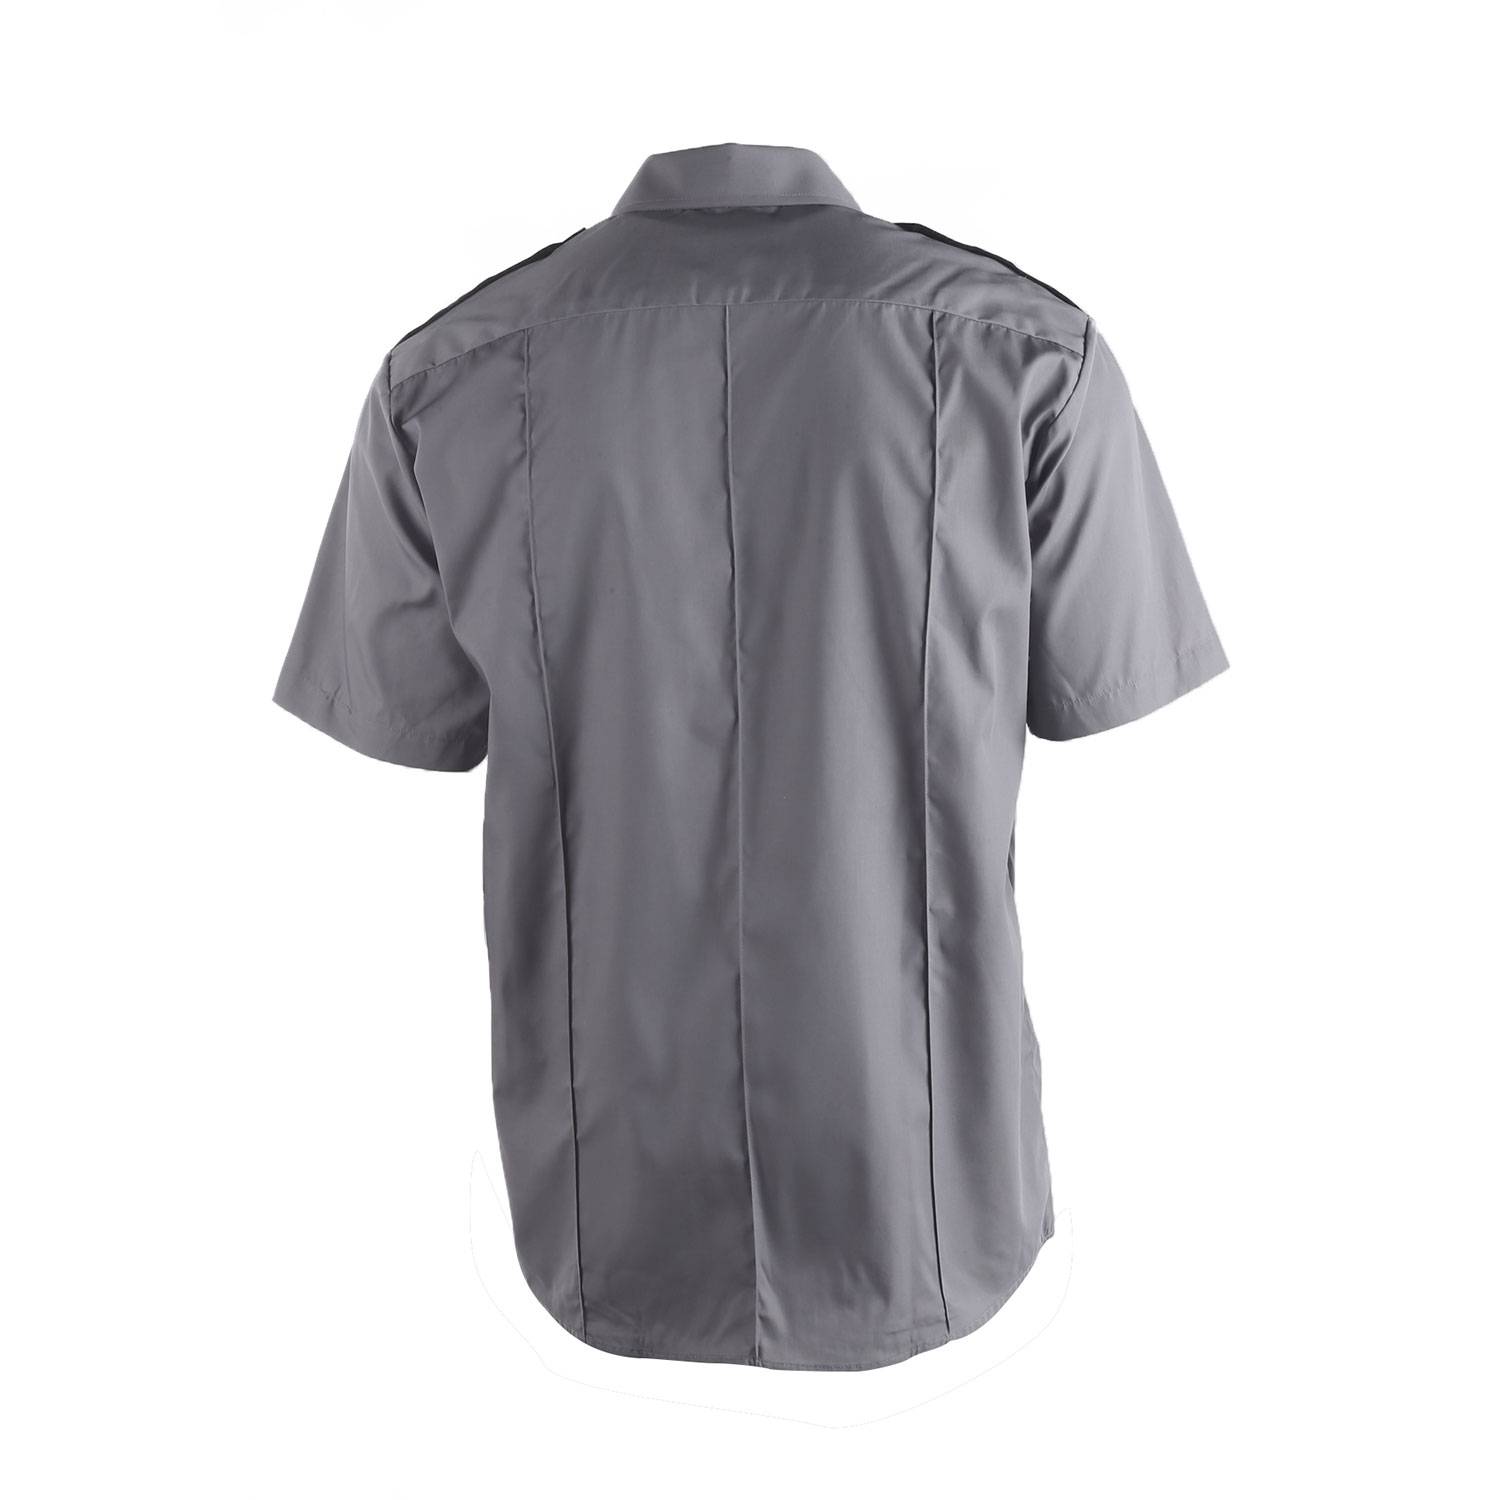 LawPro Two Tone Poly Cotton Short Sleeve Shirt